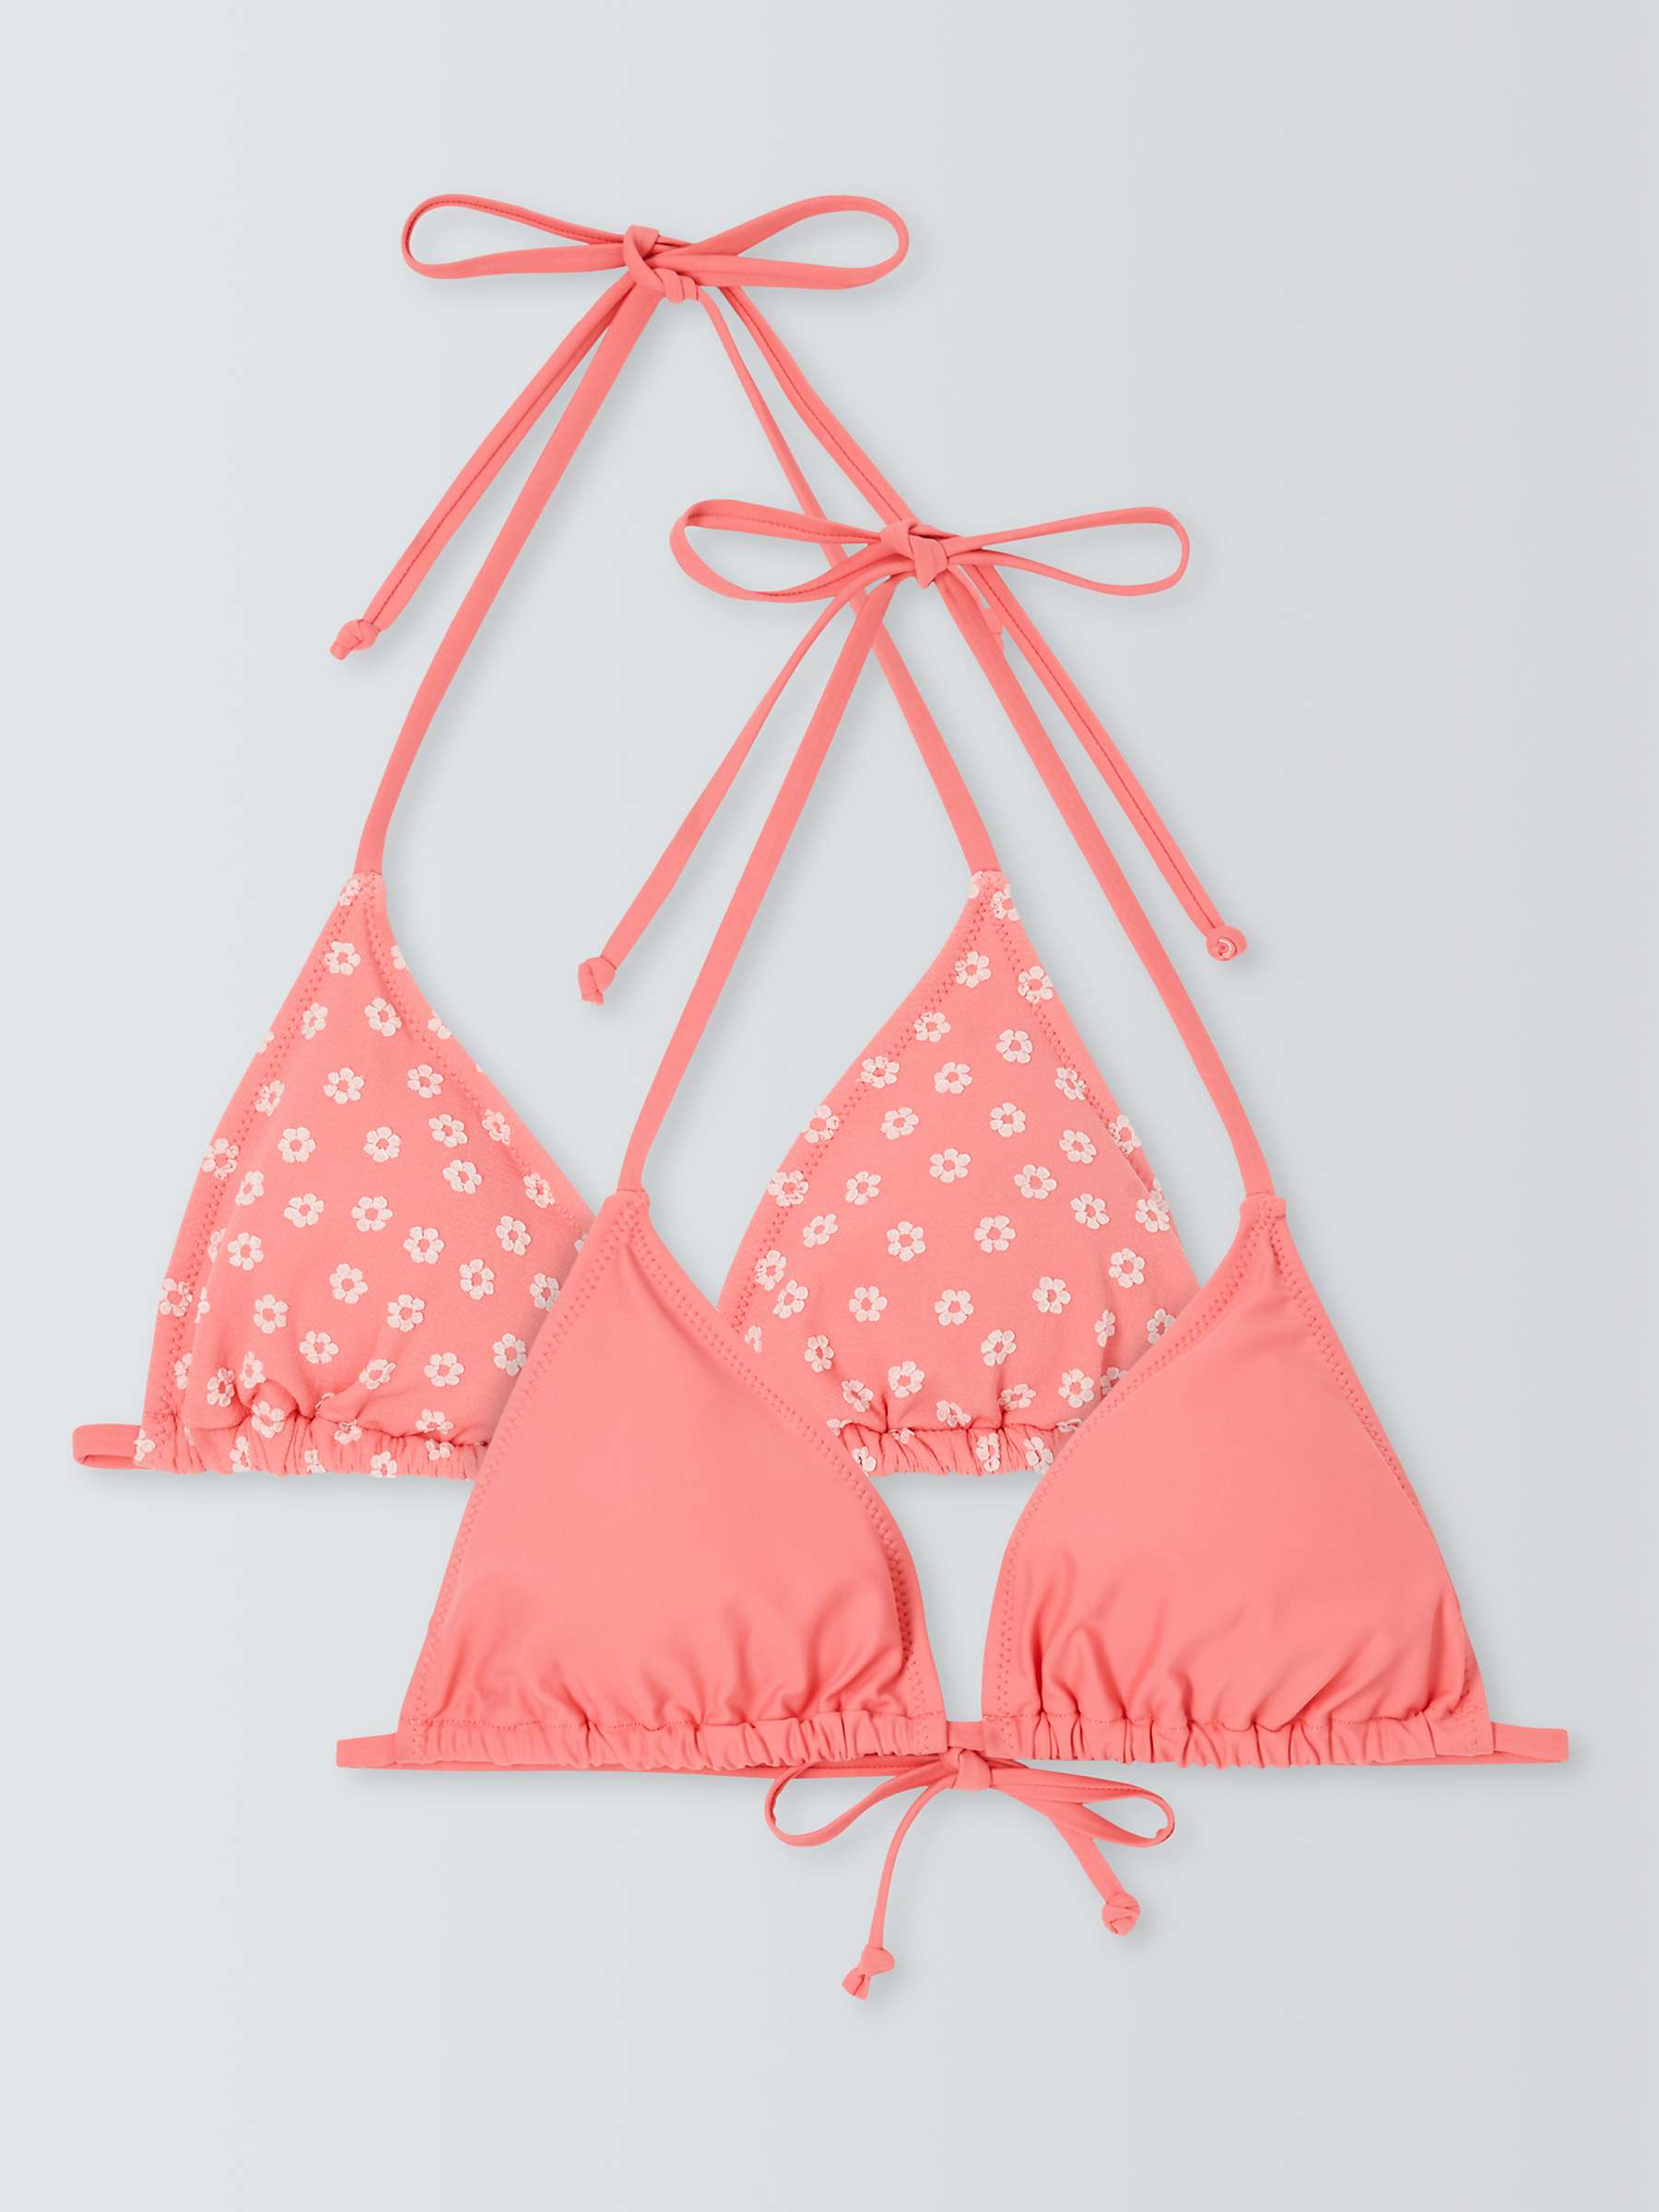 Buy John Lewis ANYDAY Jacquard Flower Triangle Bikini Top, Pack of 2 Online at johnlewis.com